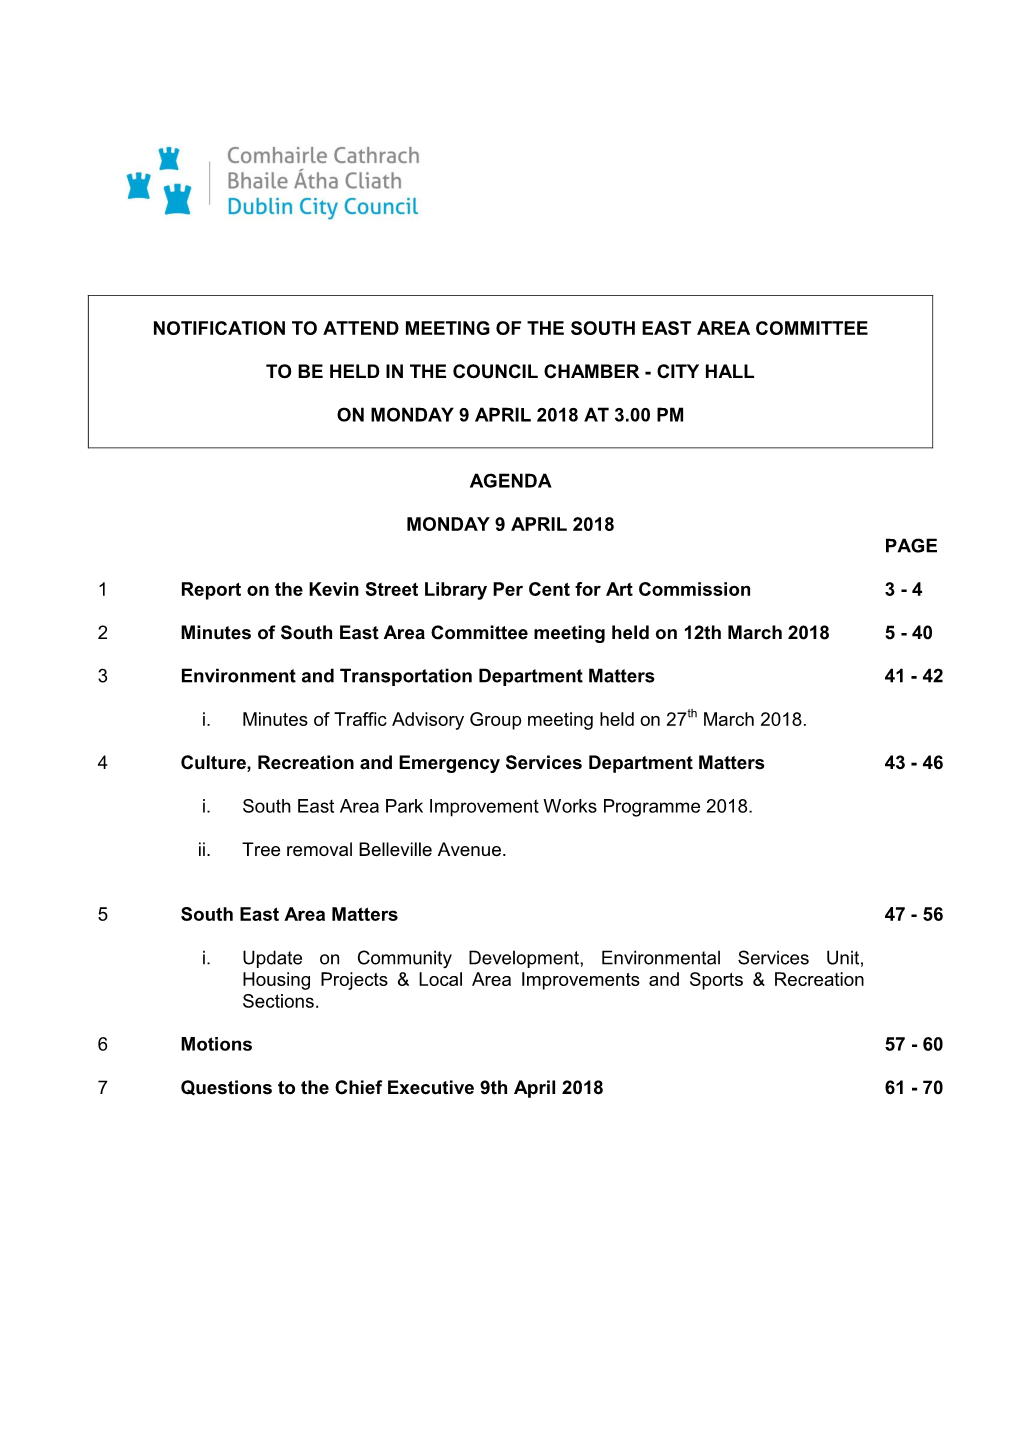 (Public Pack)Agenda Document for South East Area Committee, 09/04